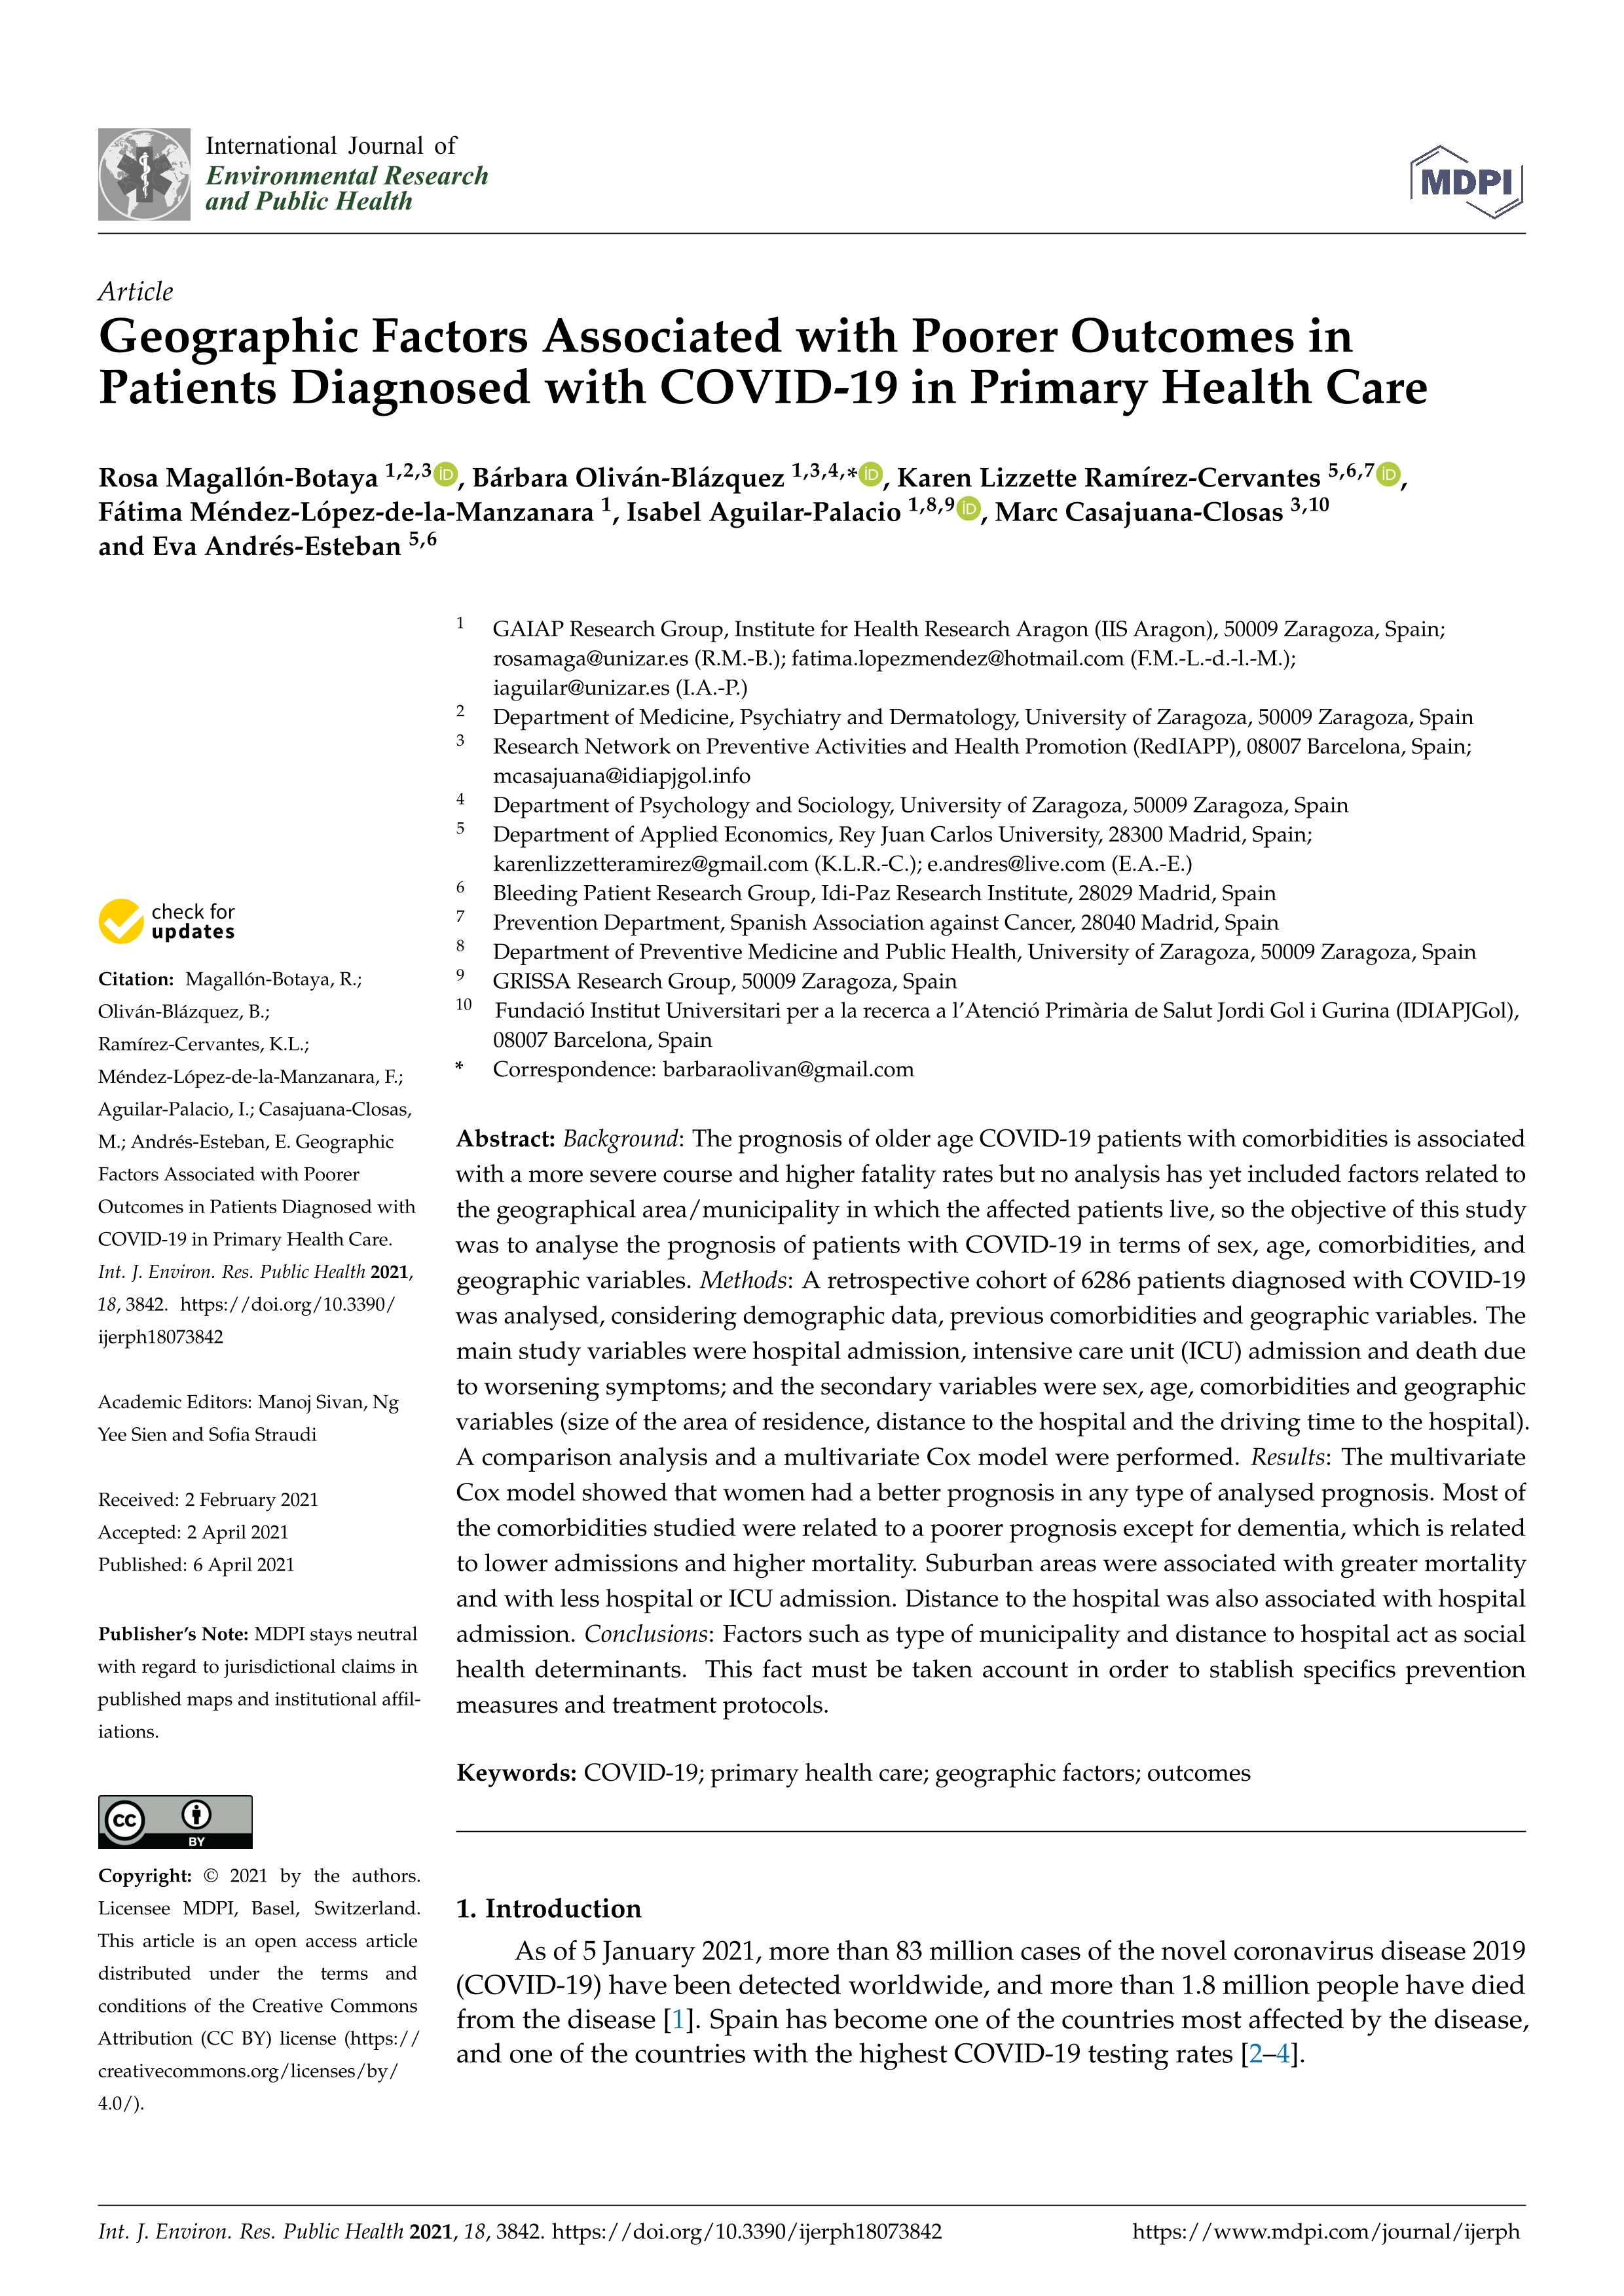 Geographic factors associated with poorer outcomes in patients diagnosed with covid-19 in primary health care